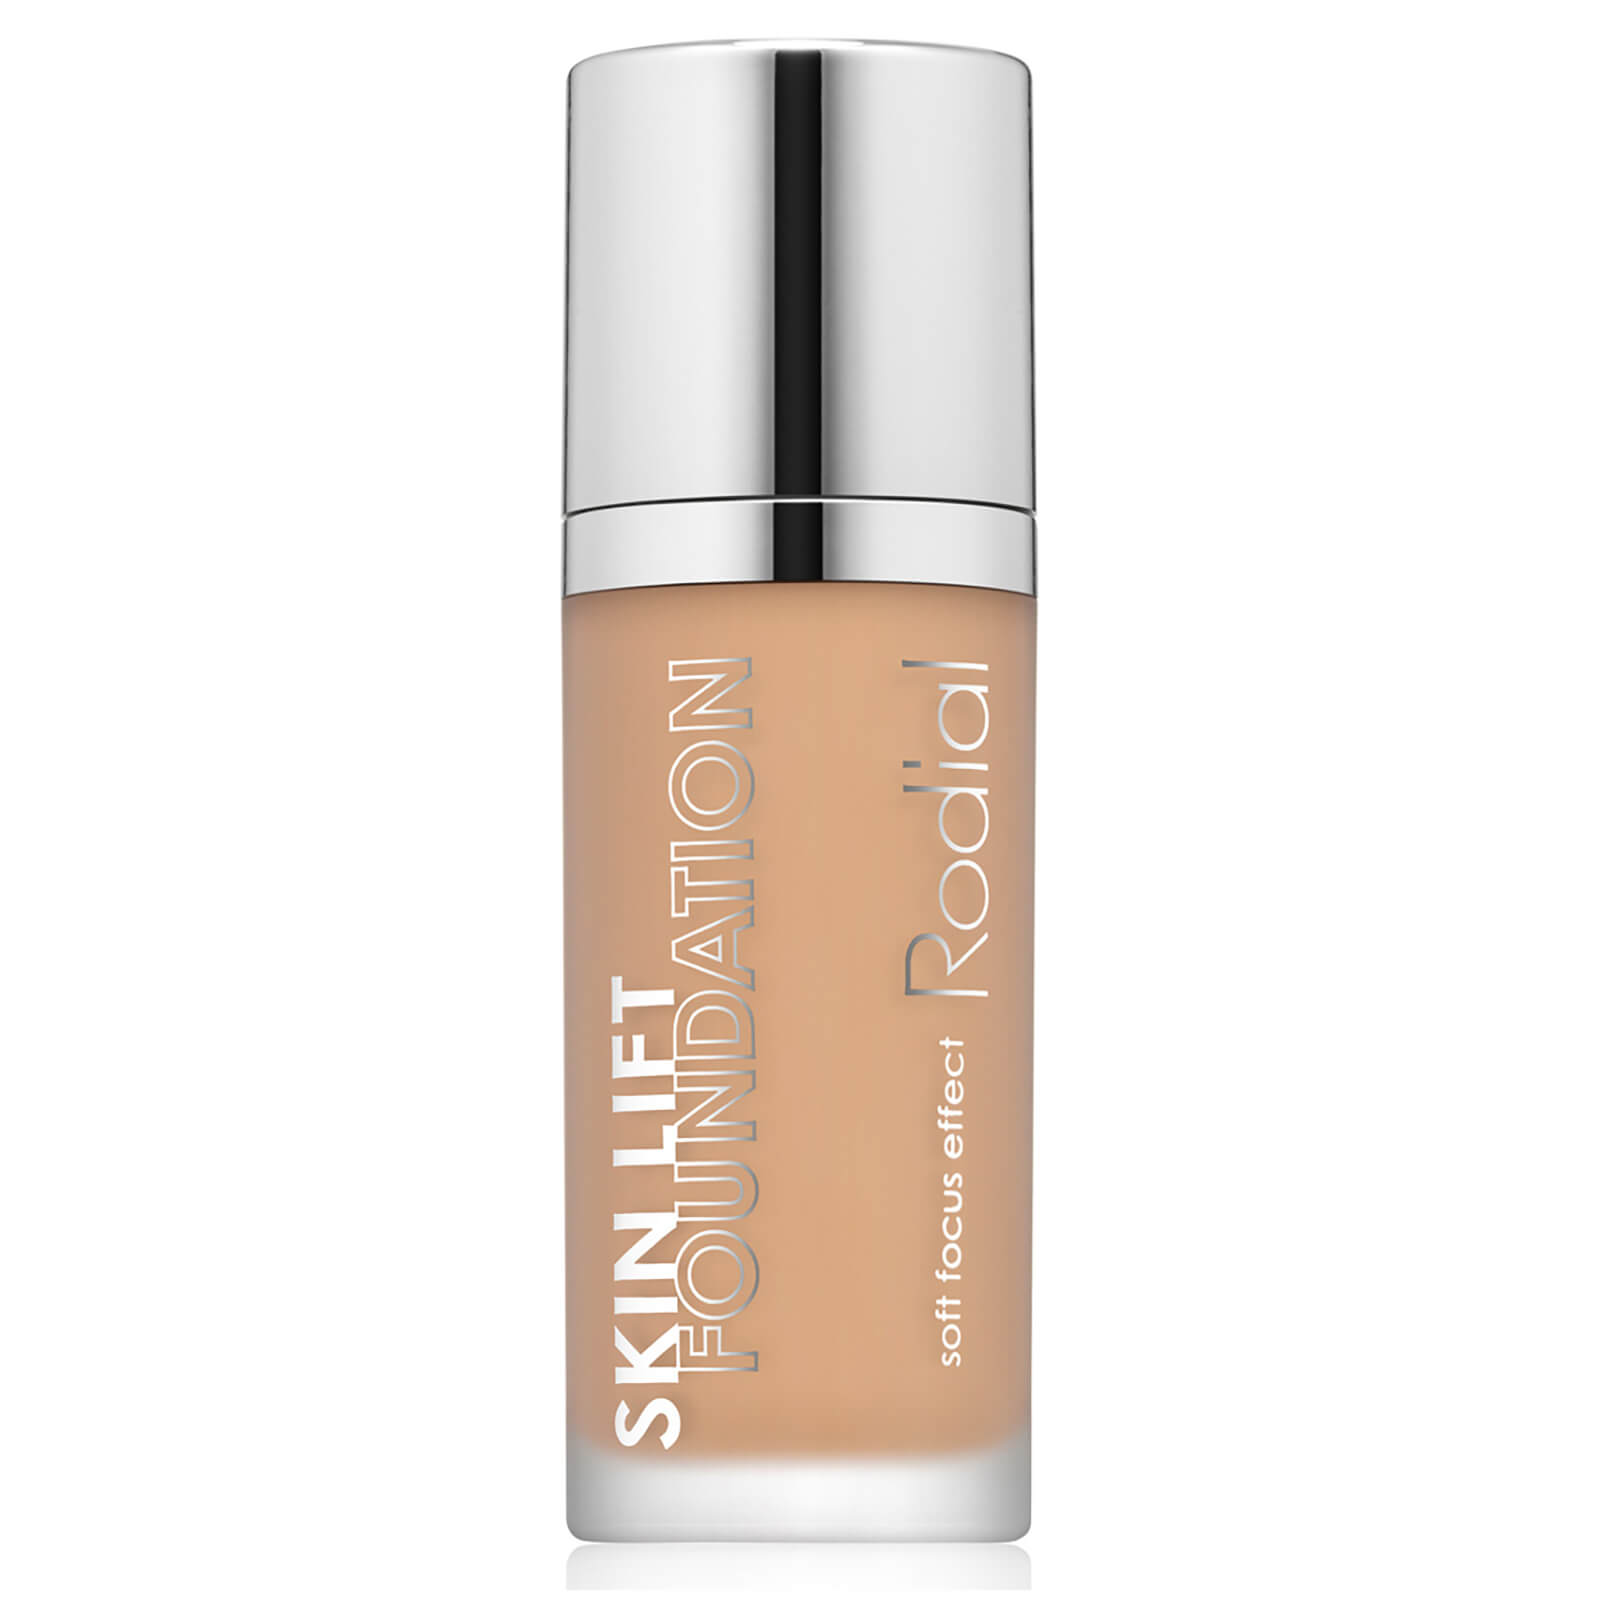 Rodial Skin Lift Foundation 25ml (Various Shades) - 8 Cappuccino von Rodial